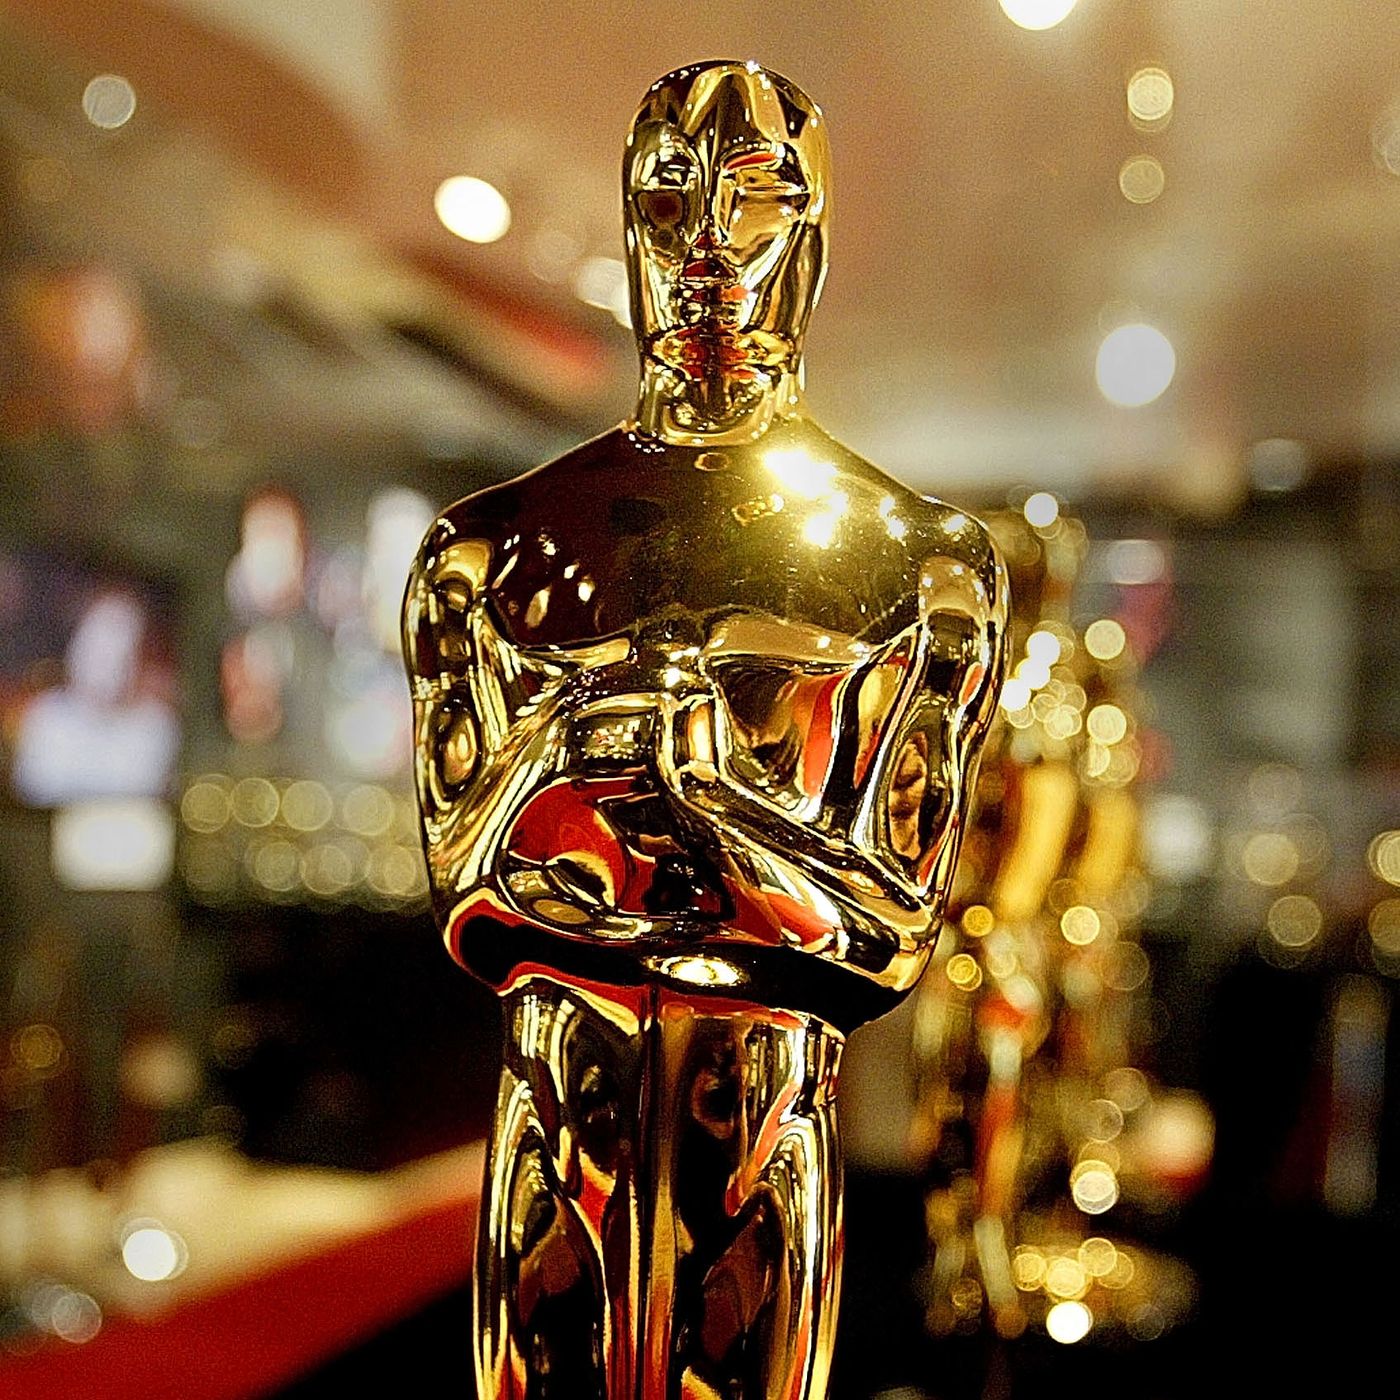 How to Watch the Oscars 2023: Host, Performers, Presenters